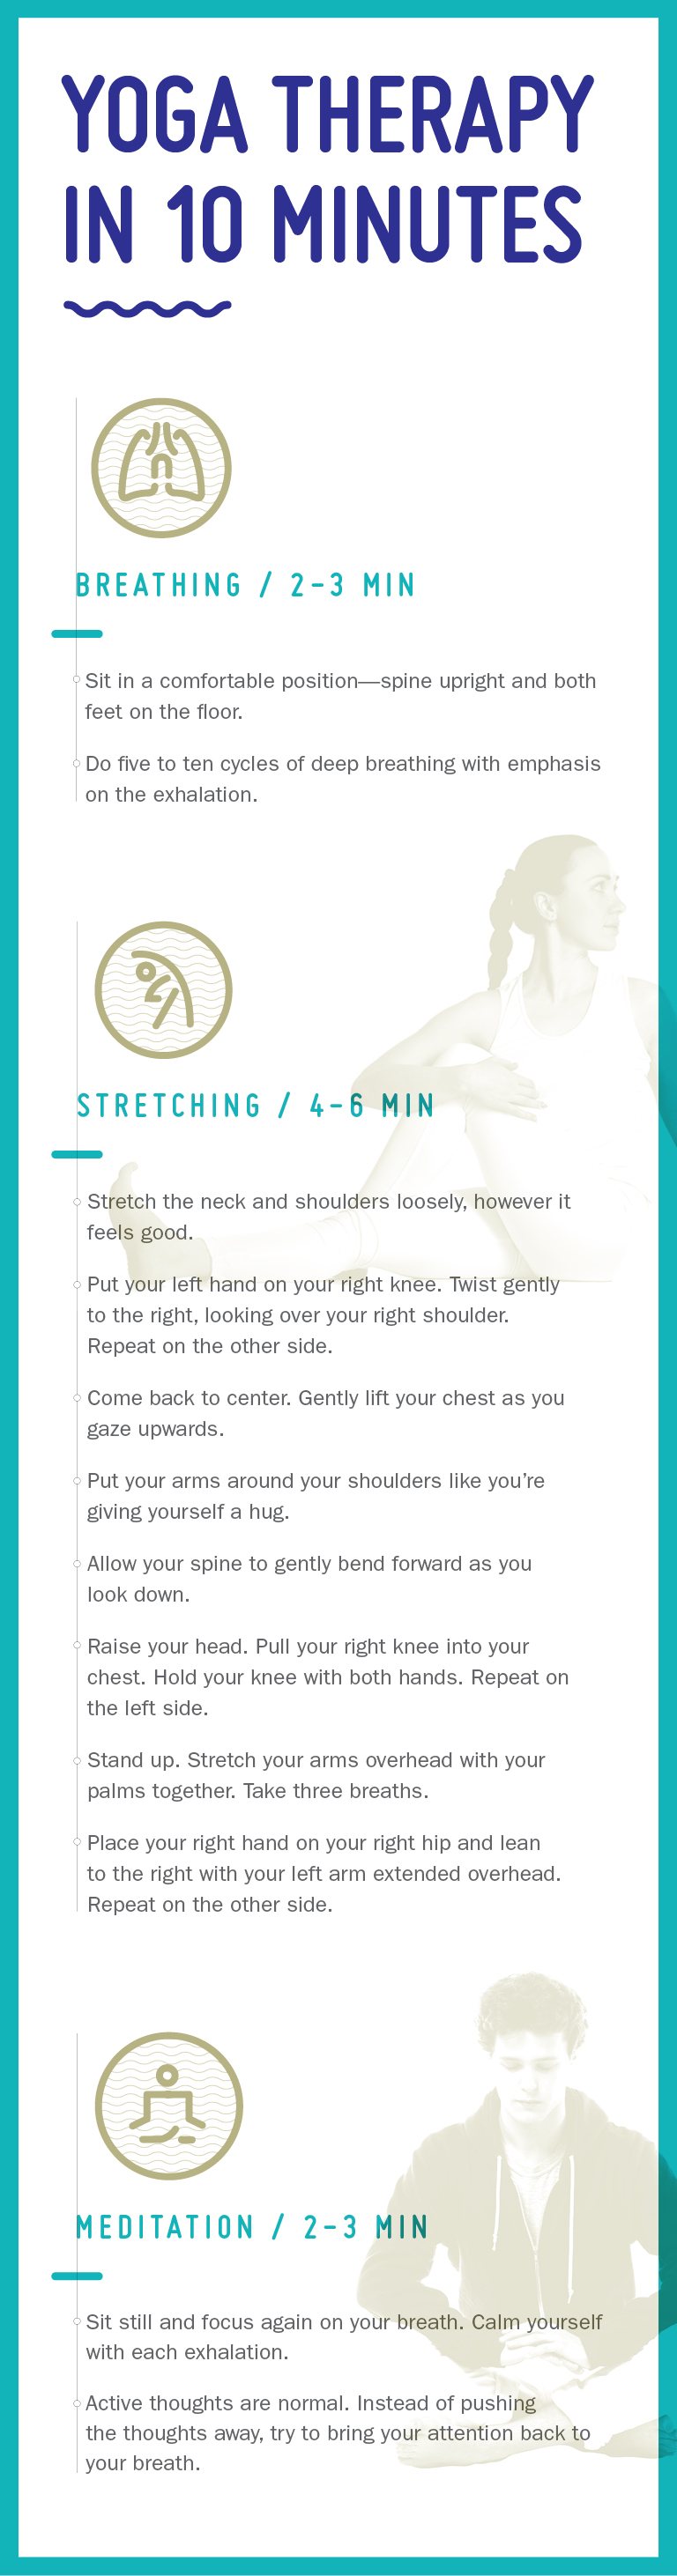 10-minute medical yoga therapy workout